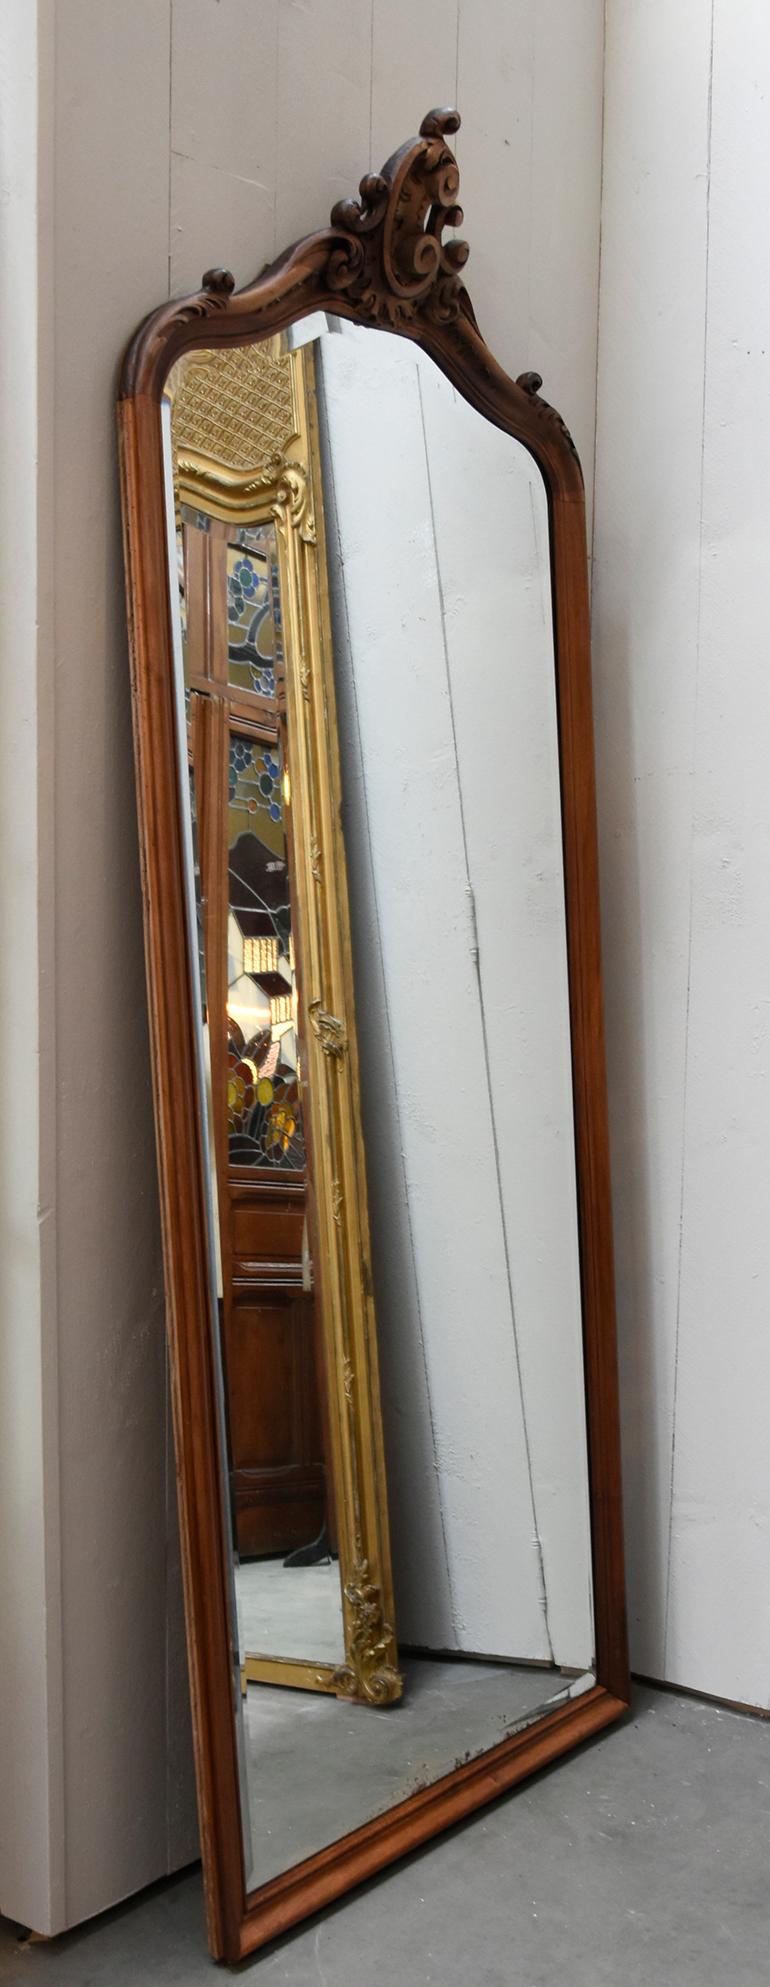 Beautiful antique mirror from the 19th century
From France with faceted glass.
With a wooden frame.